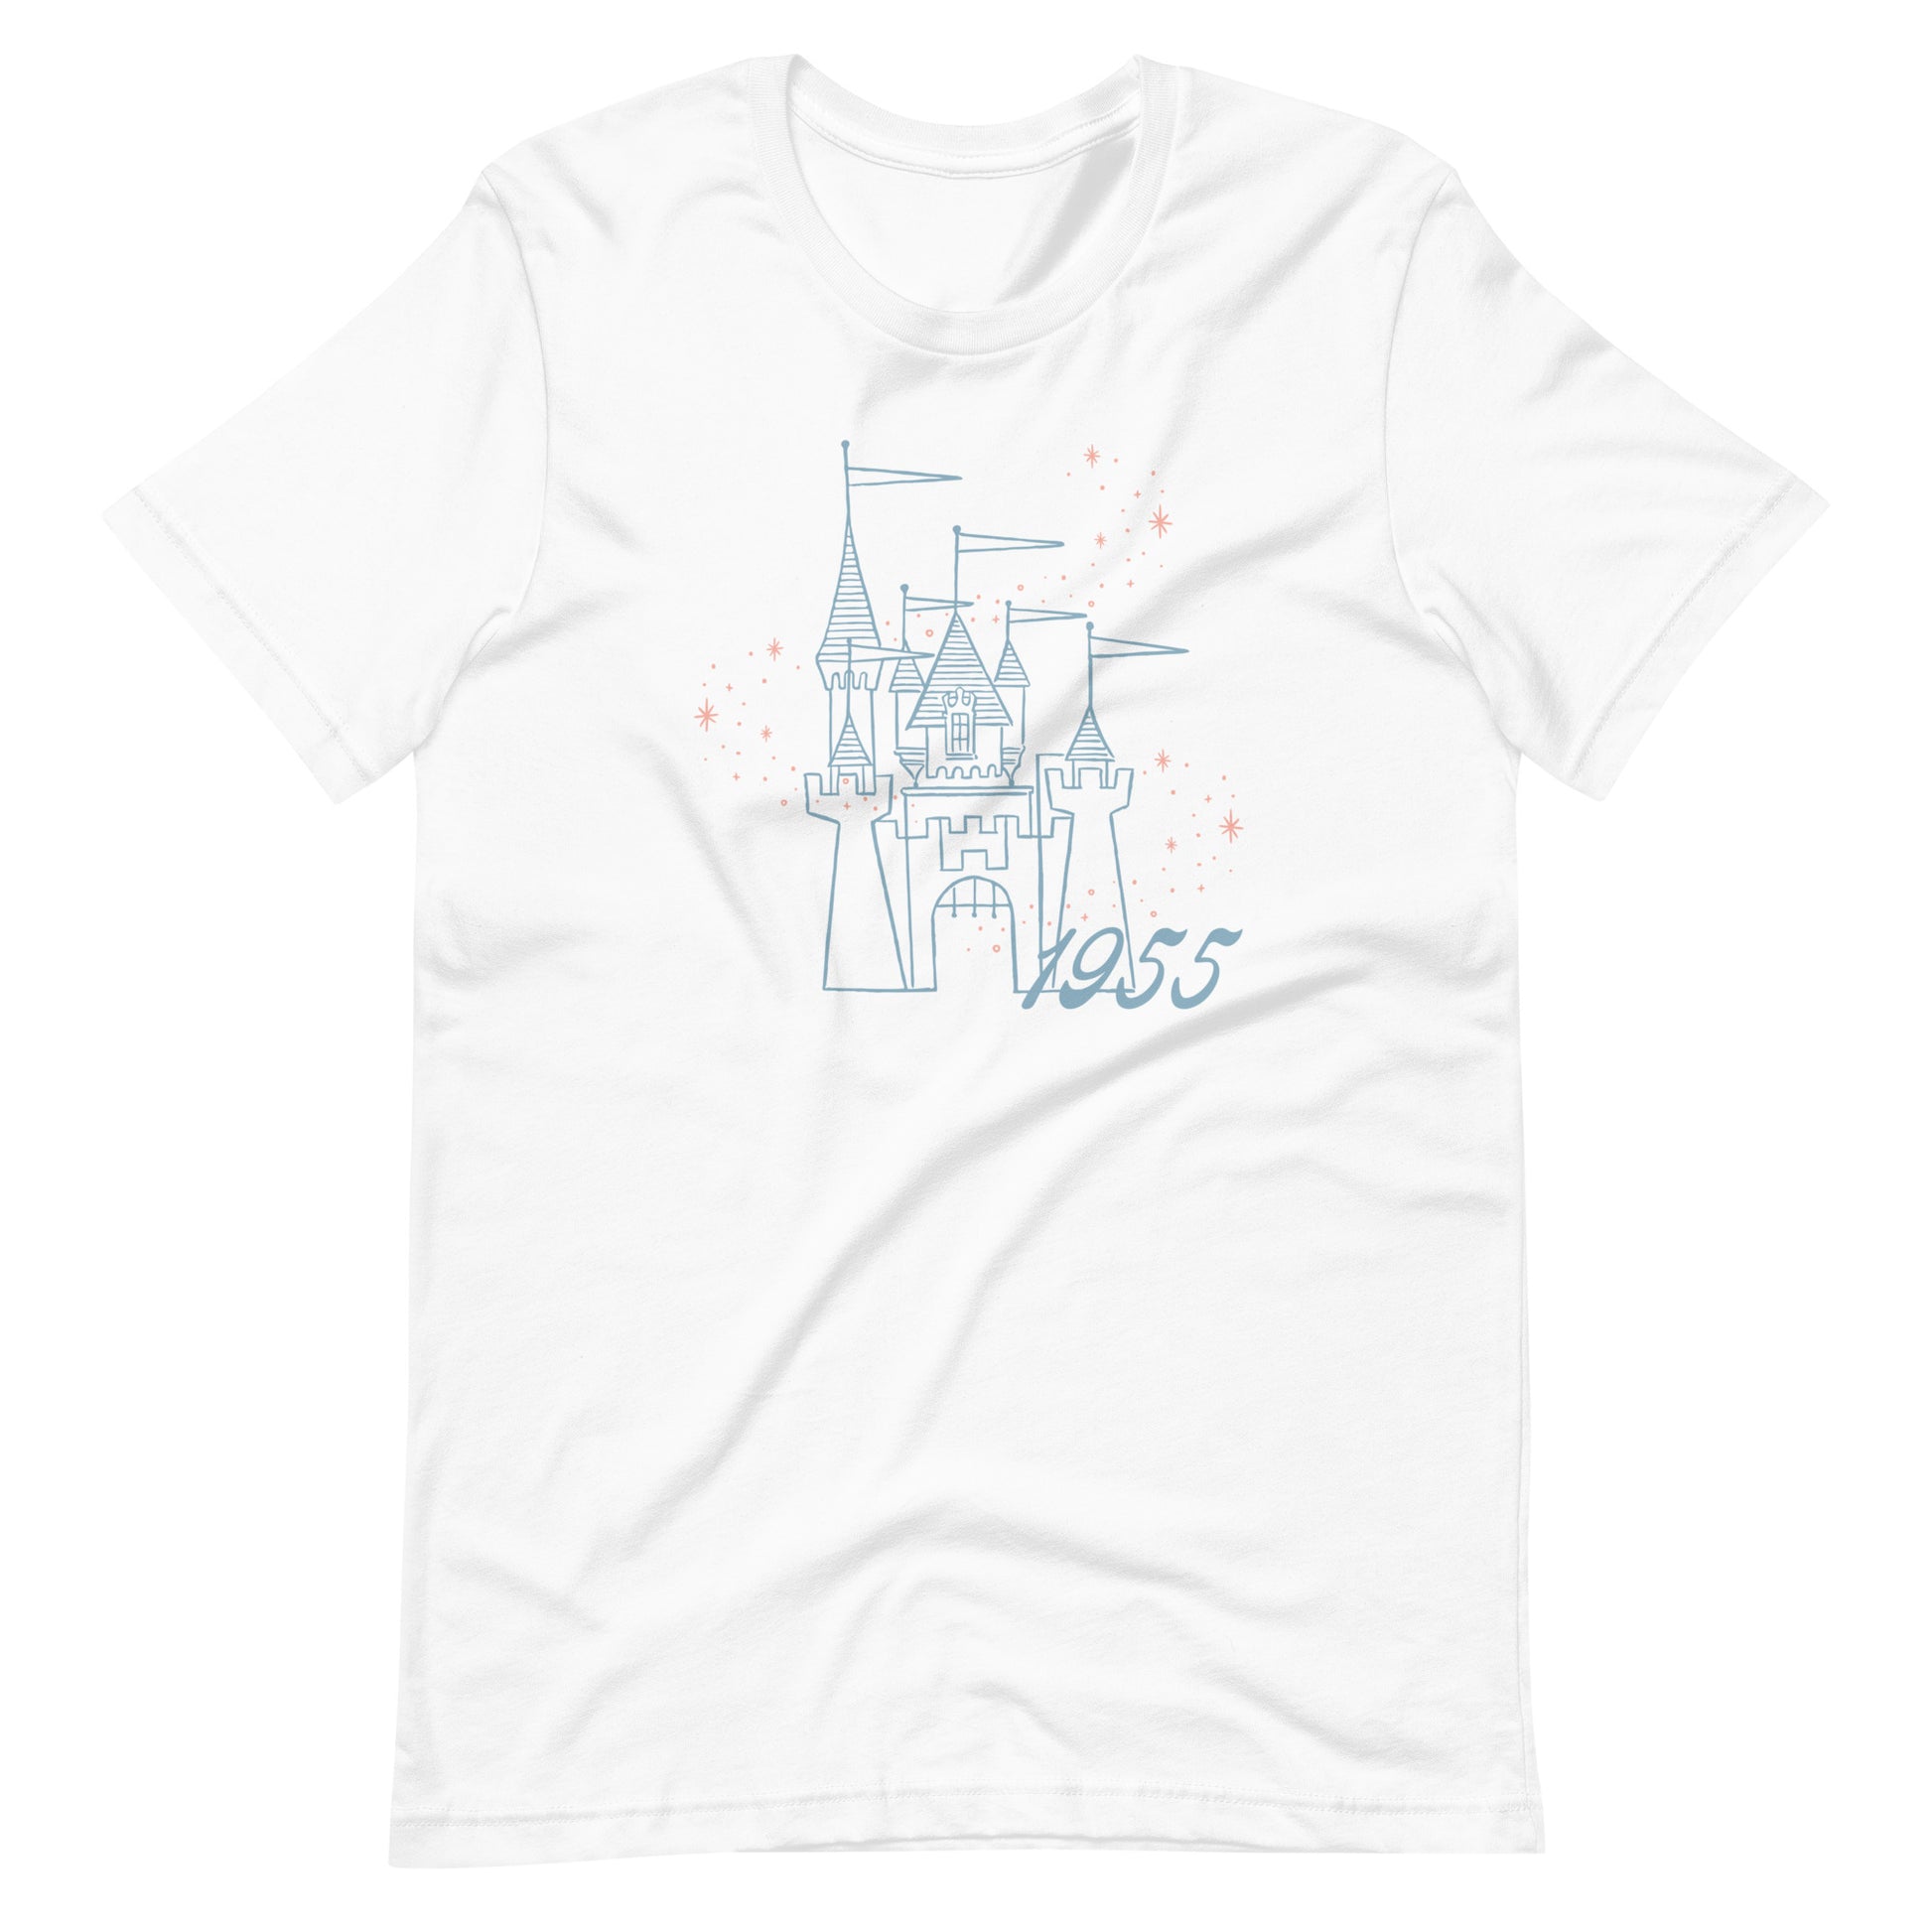 White shirt printed with vintage style sketch of the Disneyland Castle, the year 1955, and pixie dust above the castle.